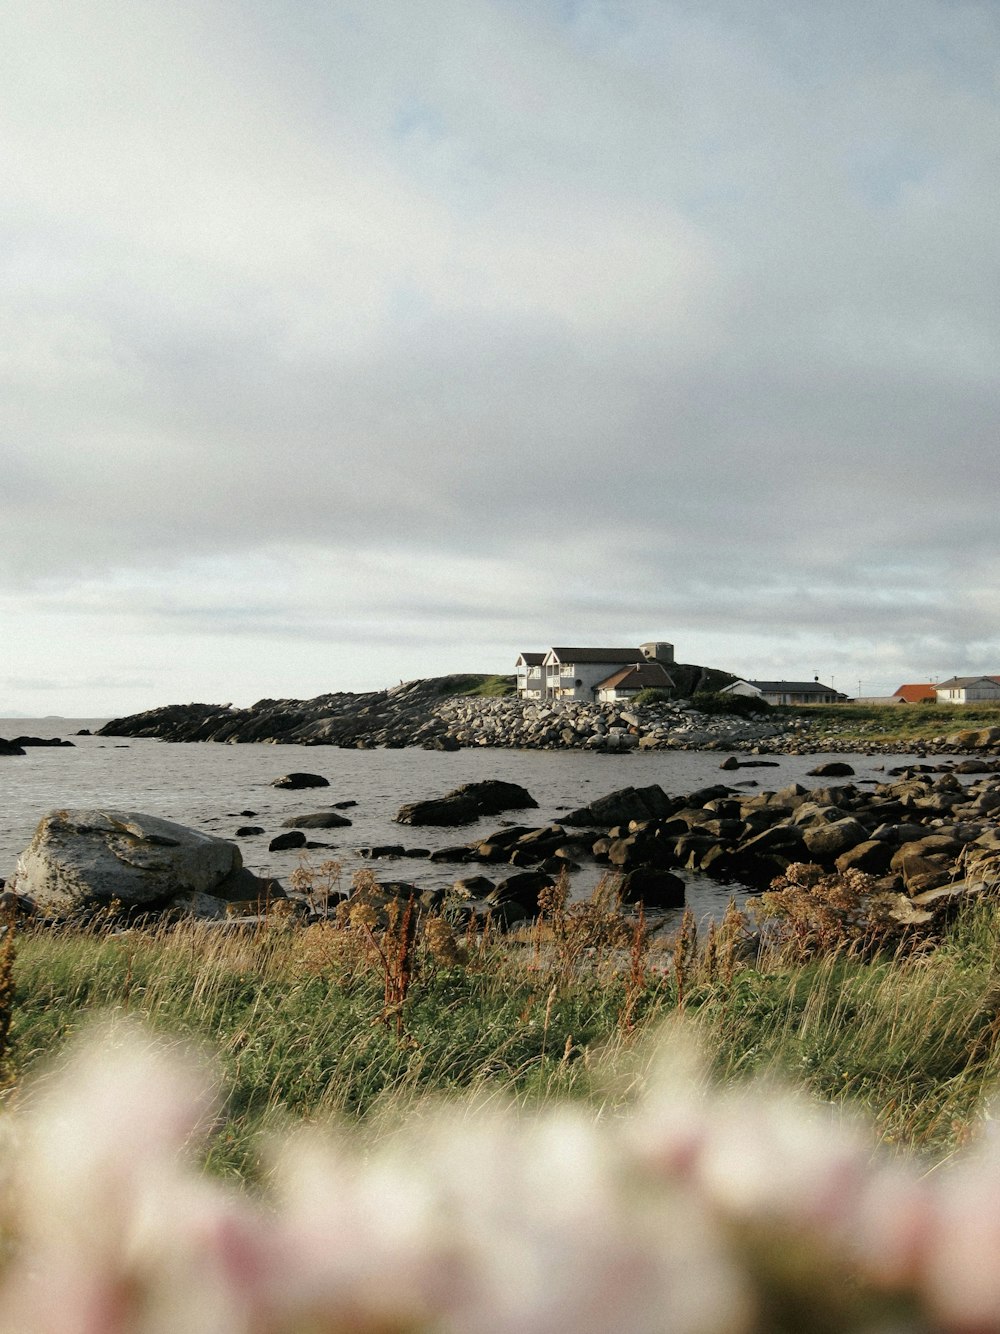 a lighthouse on a rocky shore near a body of water